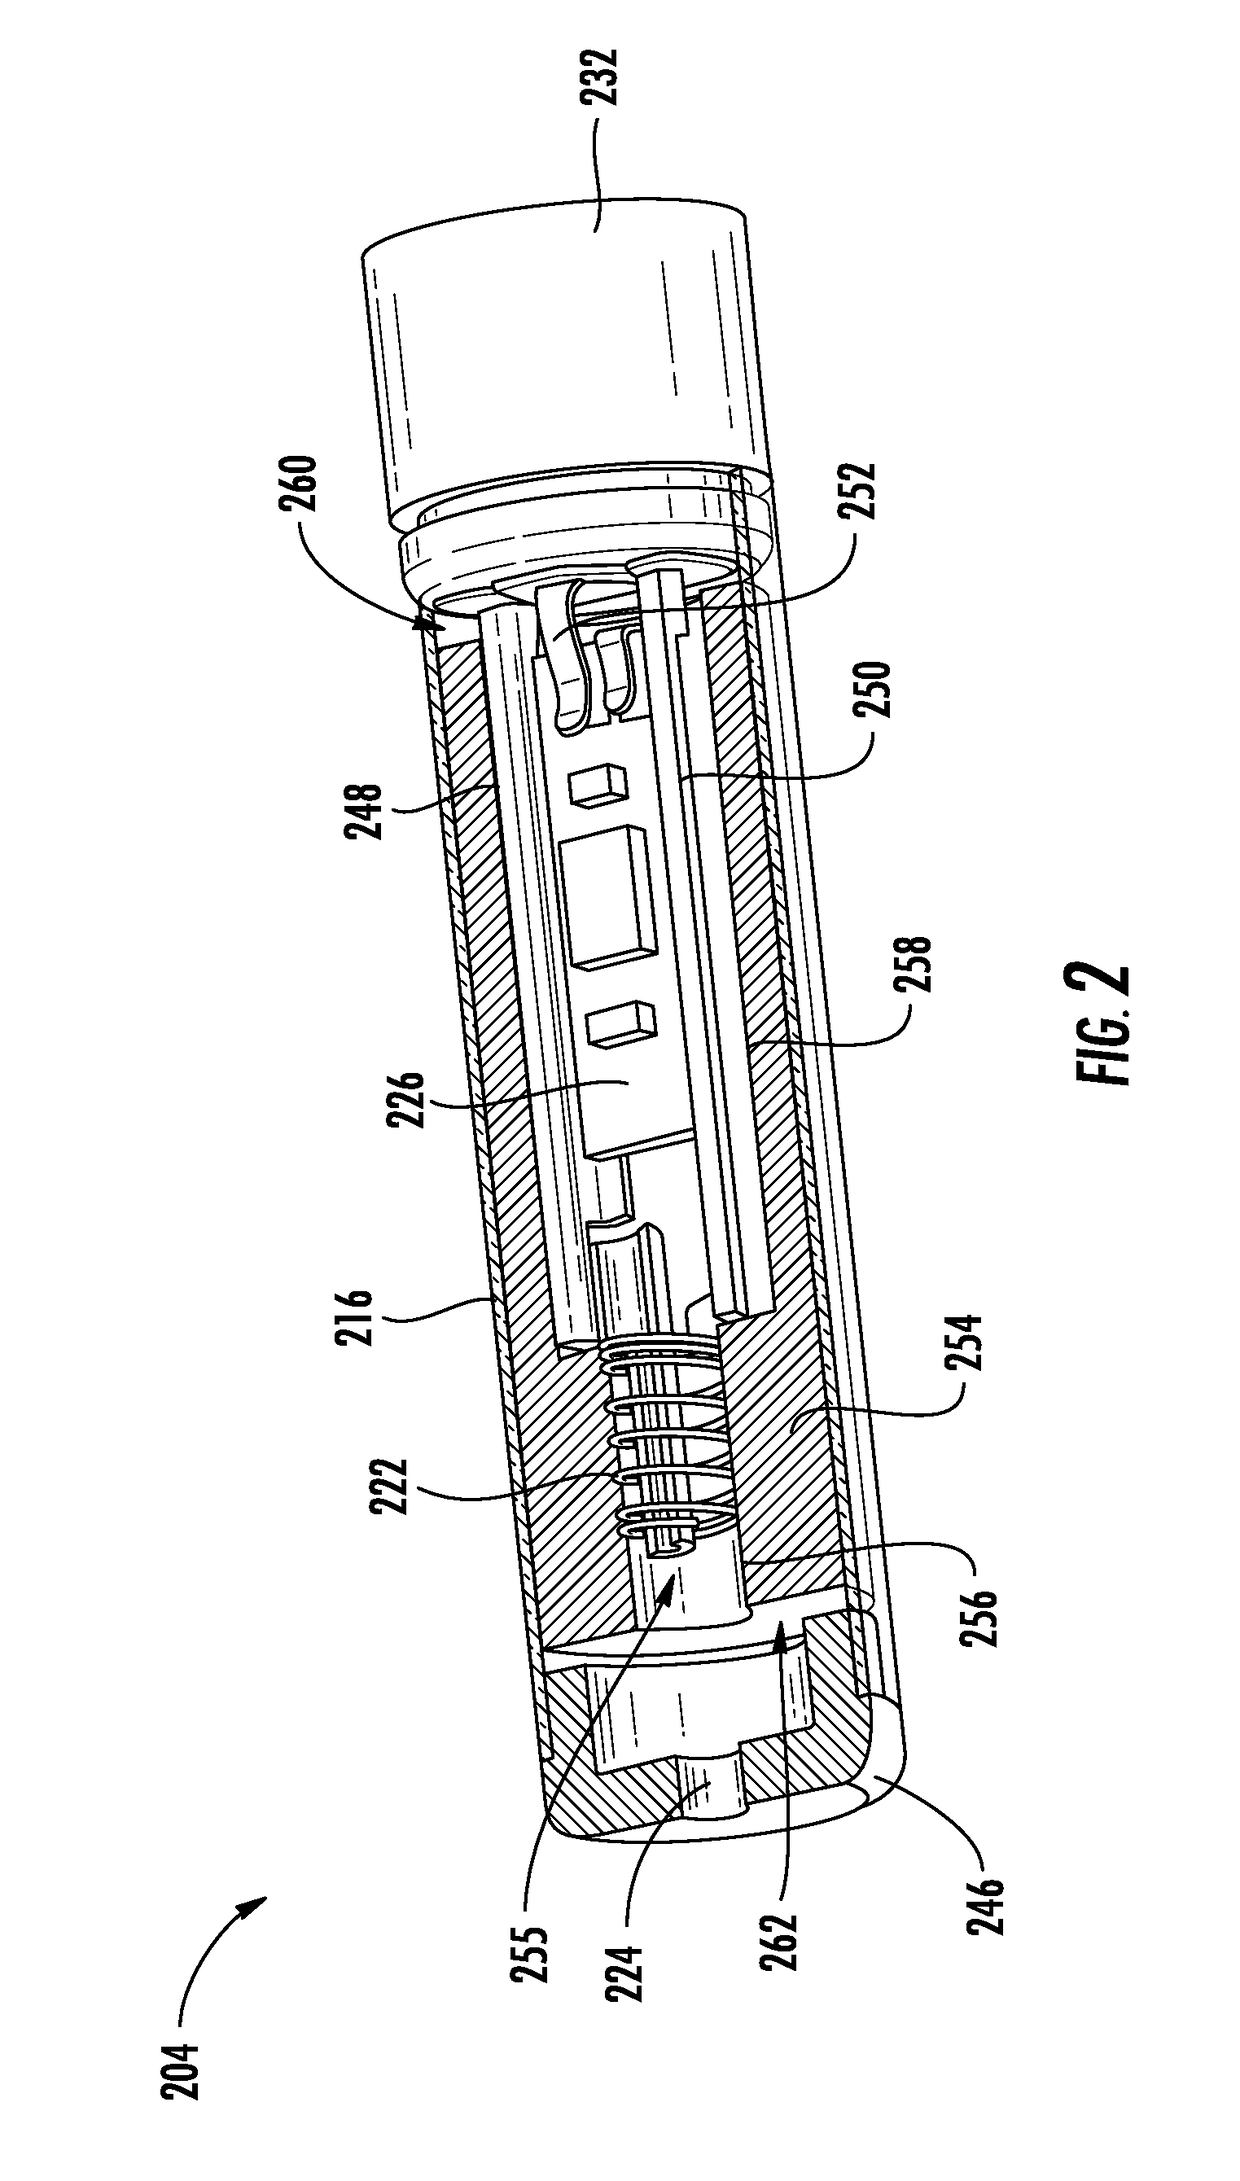 Aerosol delivery device with a liquid transport element comprising a porous monolith and related method